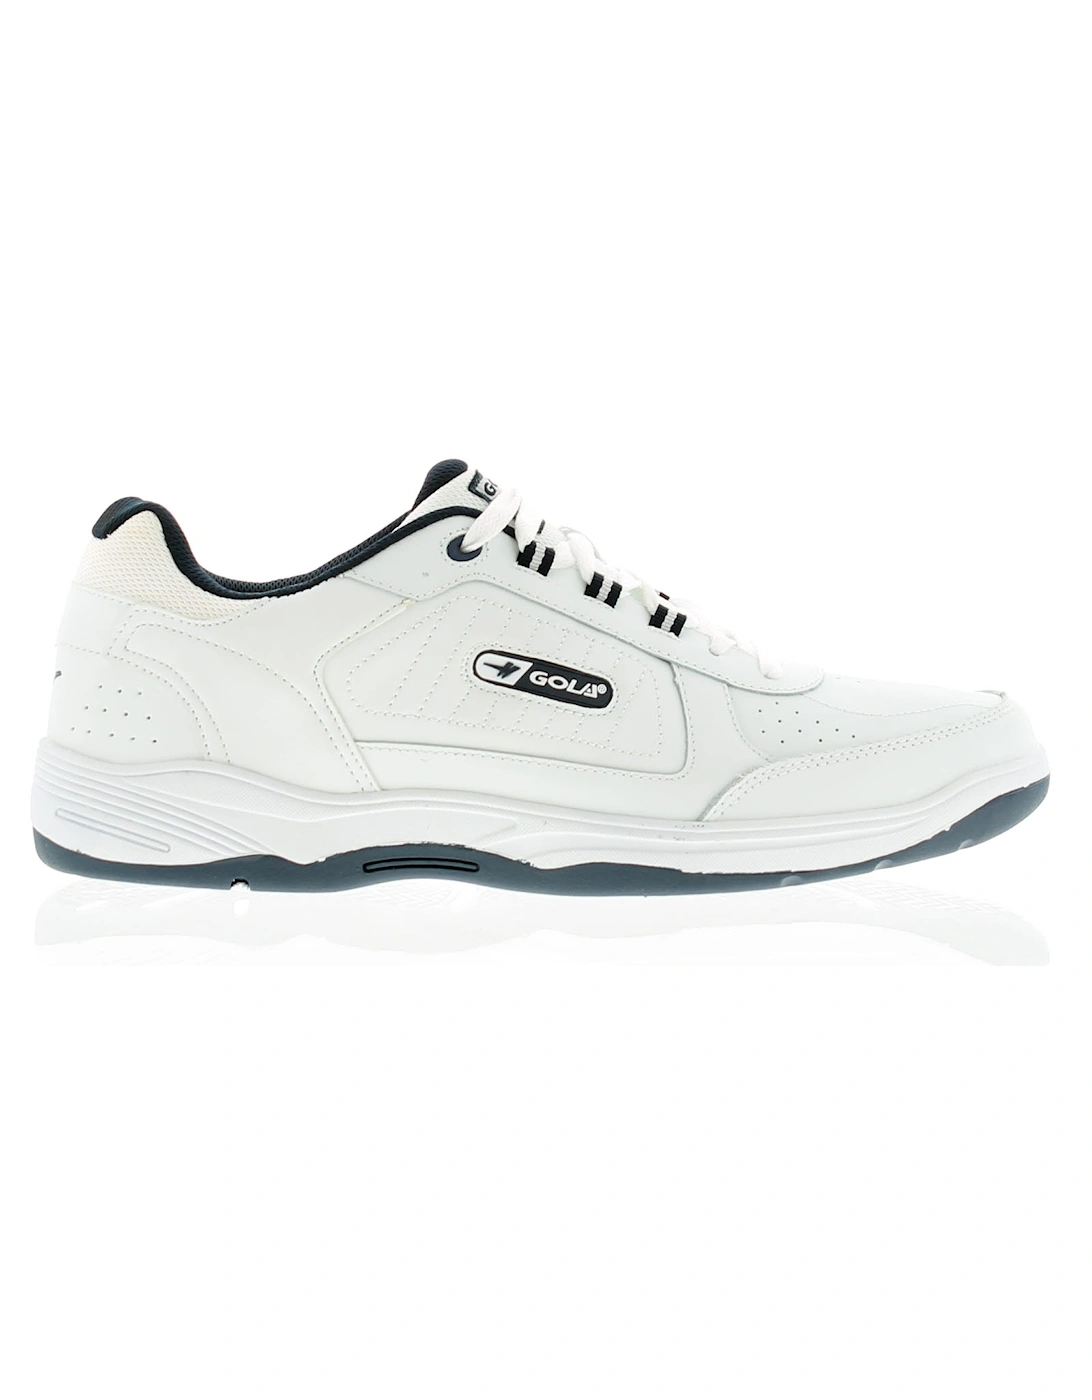 Mens Trainers Belmont Widefit xl Lace Up white UK Size